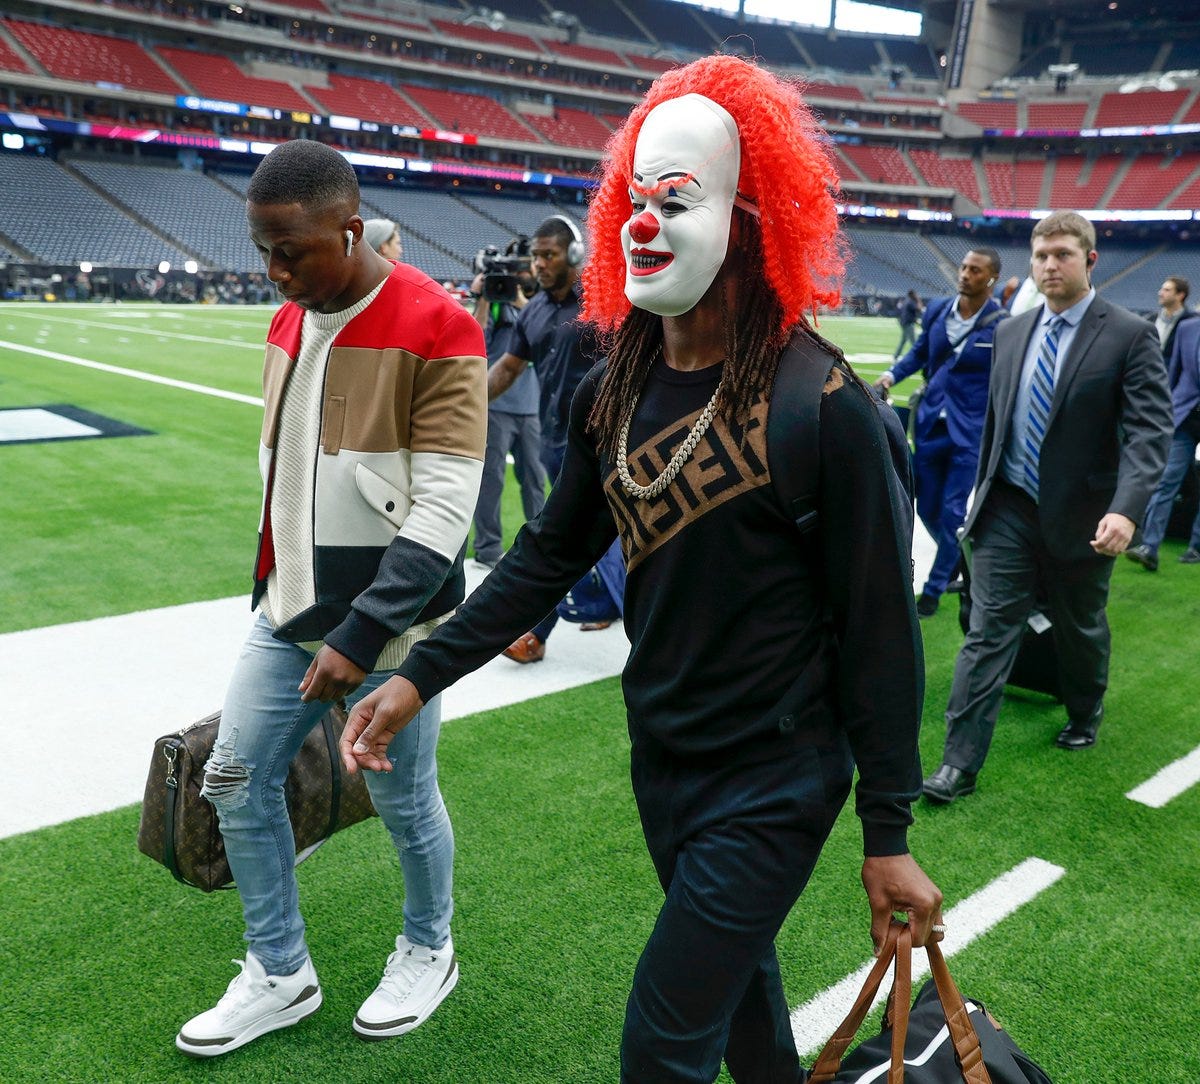 Colts wide receiver T.Y. Hilton arrives to playoff game vs. Texans wearing clown mask